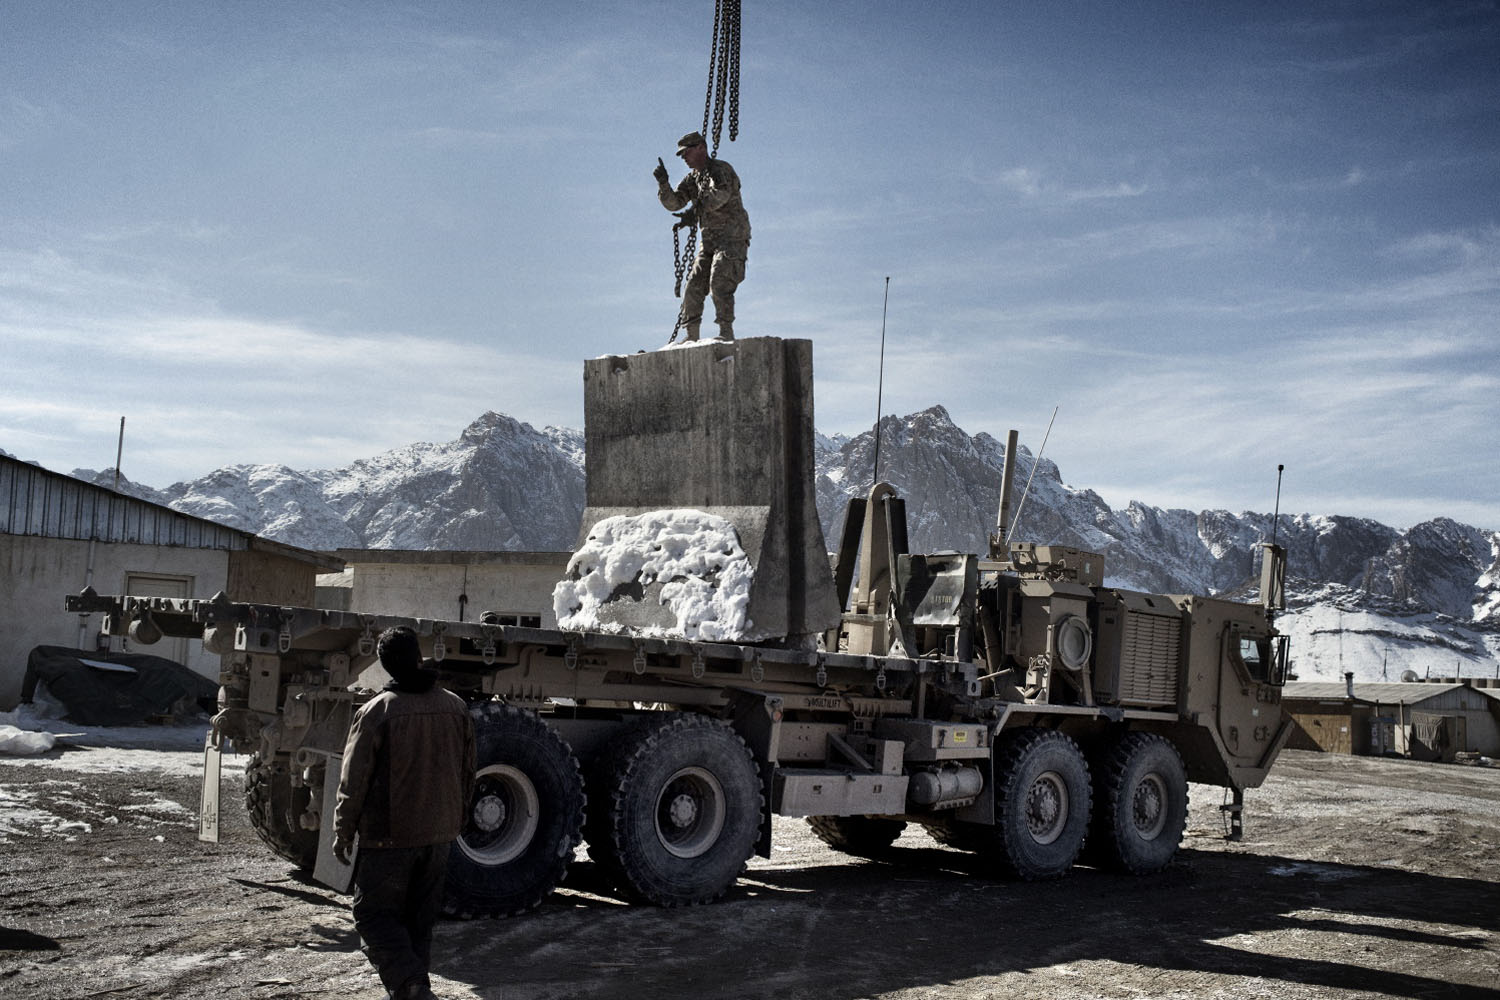 Forward Operating Base Ultimur, Logar Province, Afghanistan January 24 2013A soldier from Bull Battery, 1-319th Airborne Field Artillery Battalion loads concrete blocks on a truck in preparation for leaving Forward Operating Ultimur, Logar Province, Afghanistan. Bull Battery is returning to their base in Germany after a nine-month tour in eastern Afghanistan.